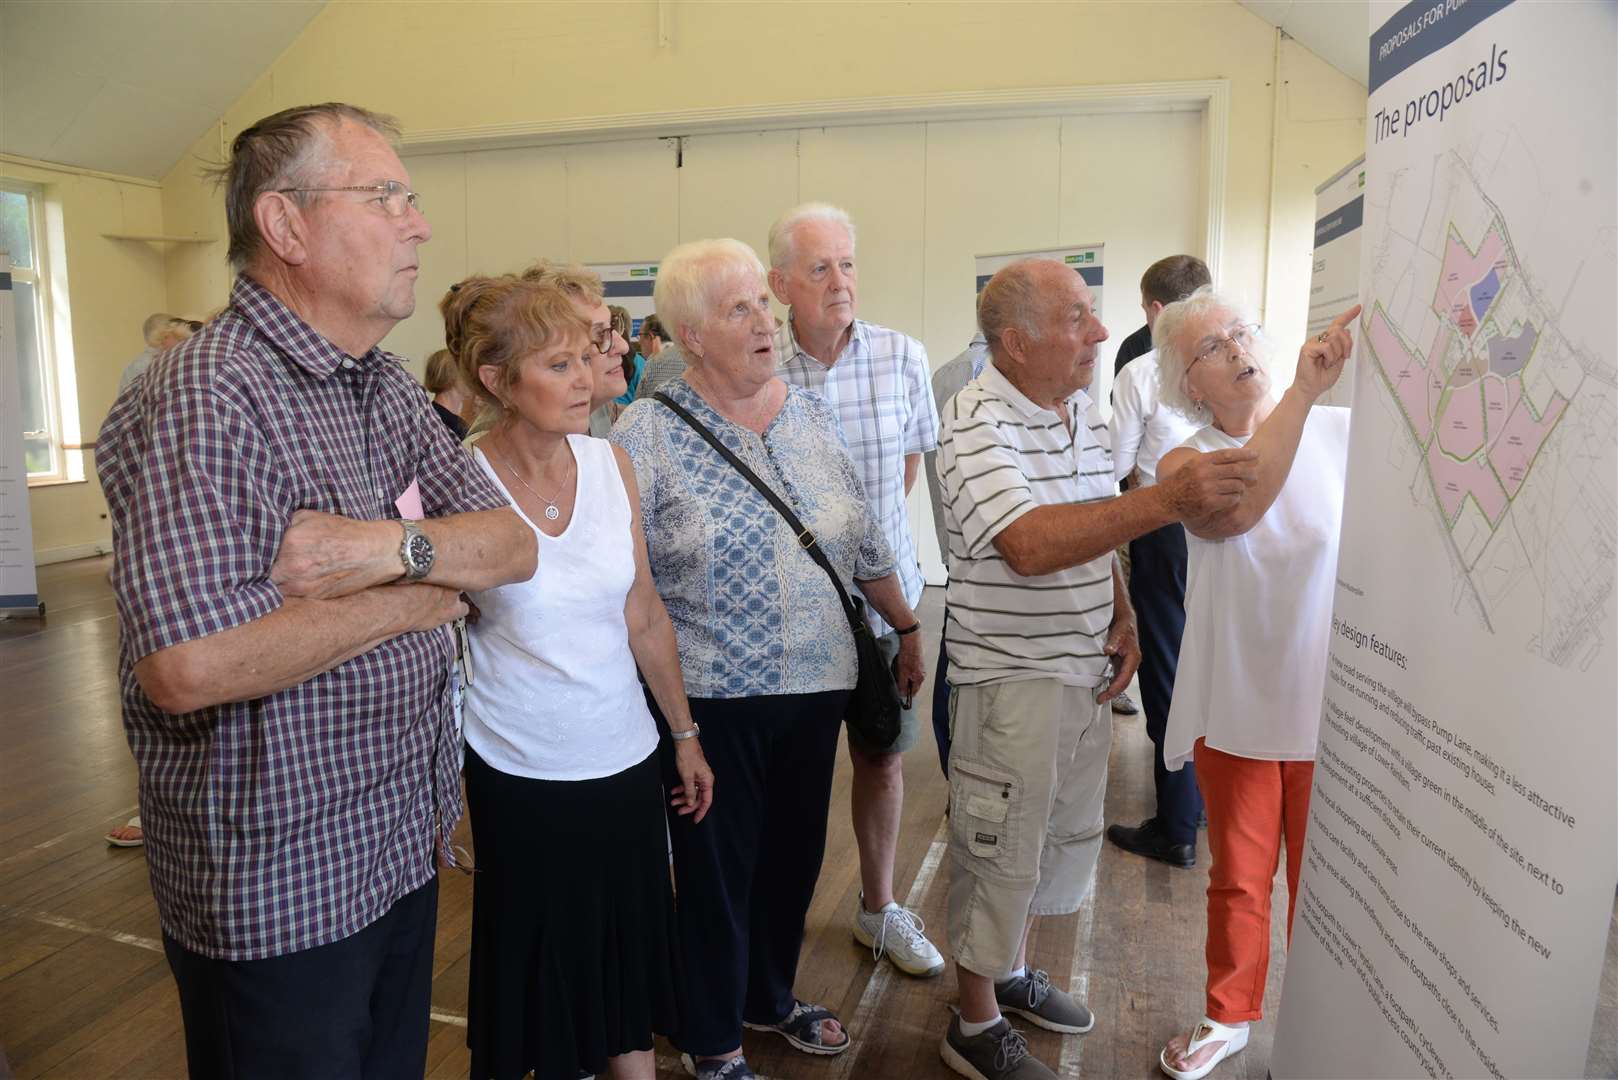 Local residents view the plans at the Pump Lane development consultation in Holy Trinity Church Hall, Twydall on Friday. Picture: Chris Davey. (13735036)